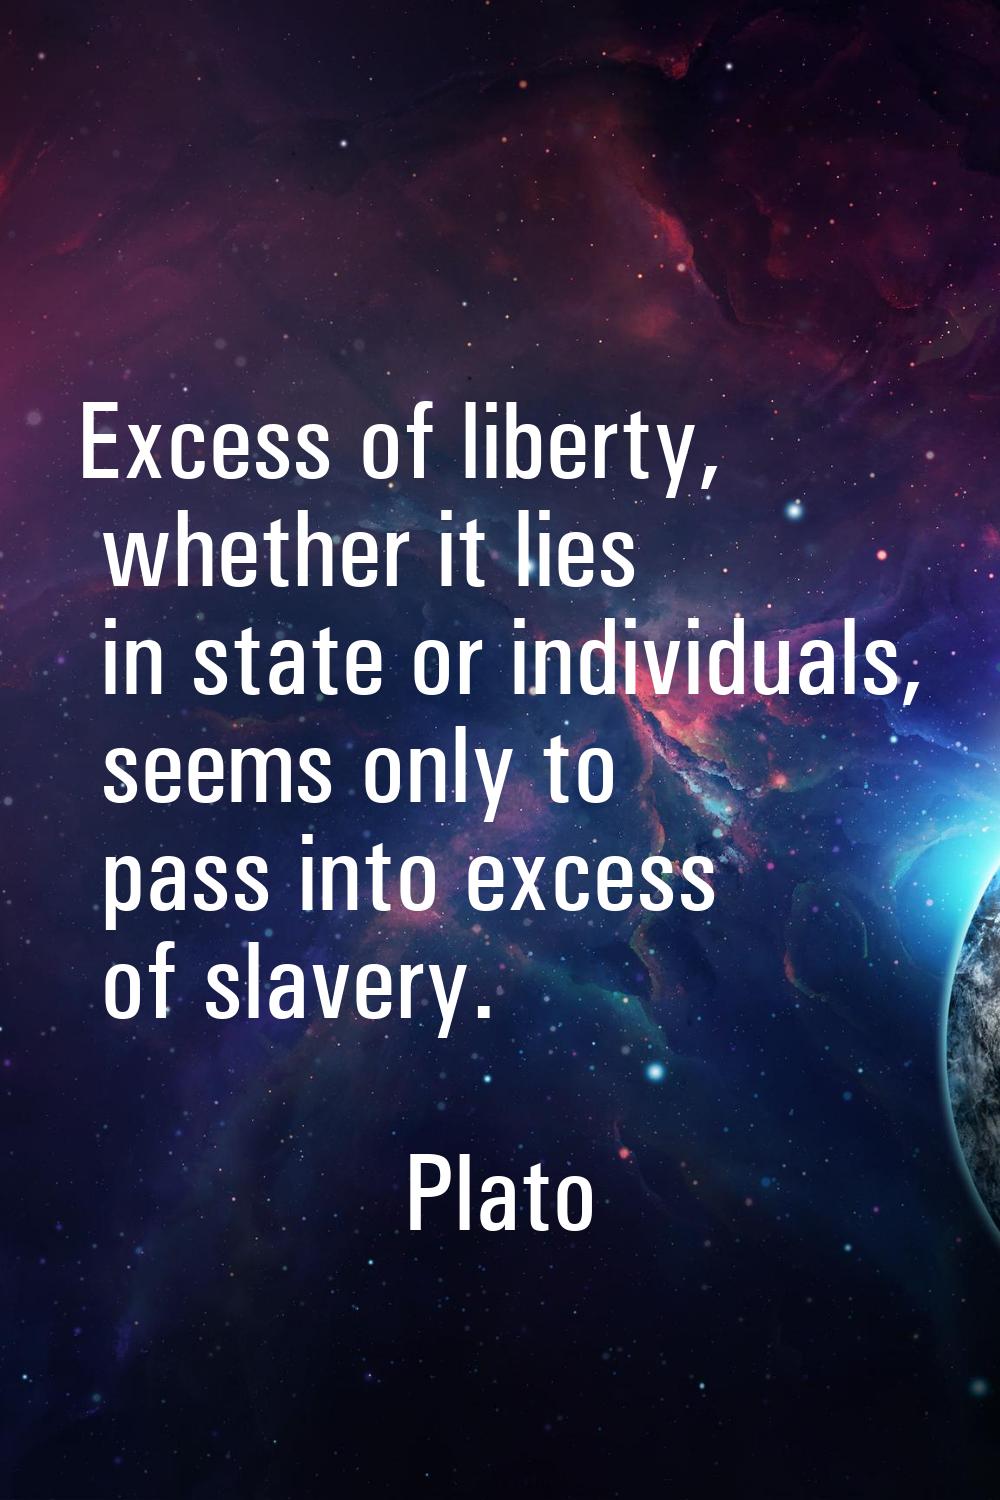 Excess of liberty, whether it lies in state or individuals, seems only to pass into excess of slave